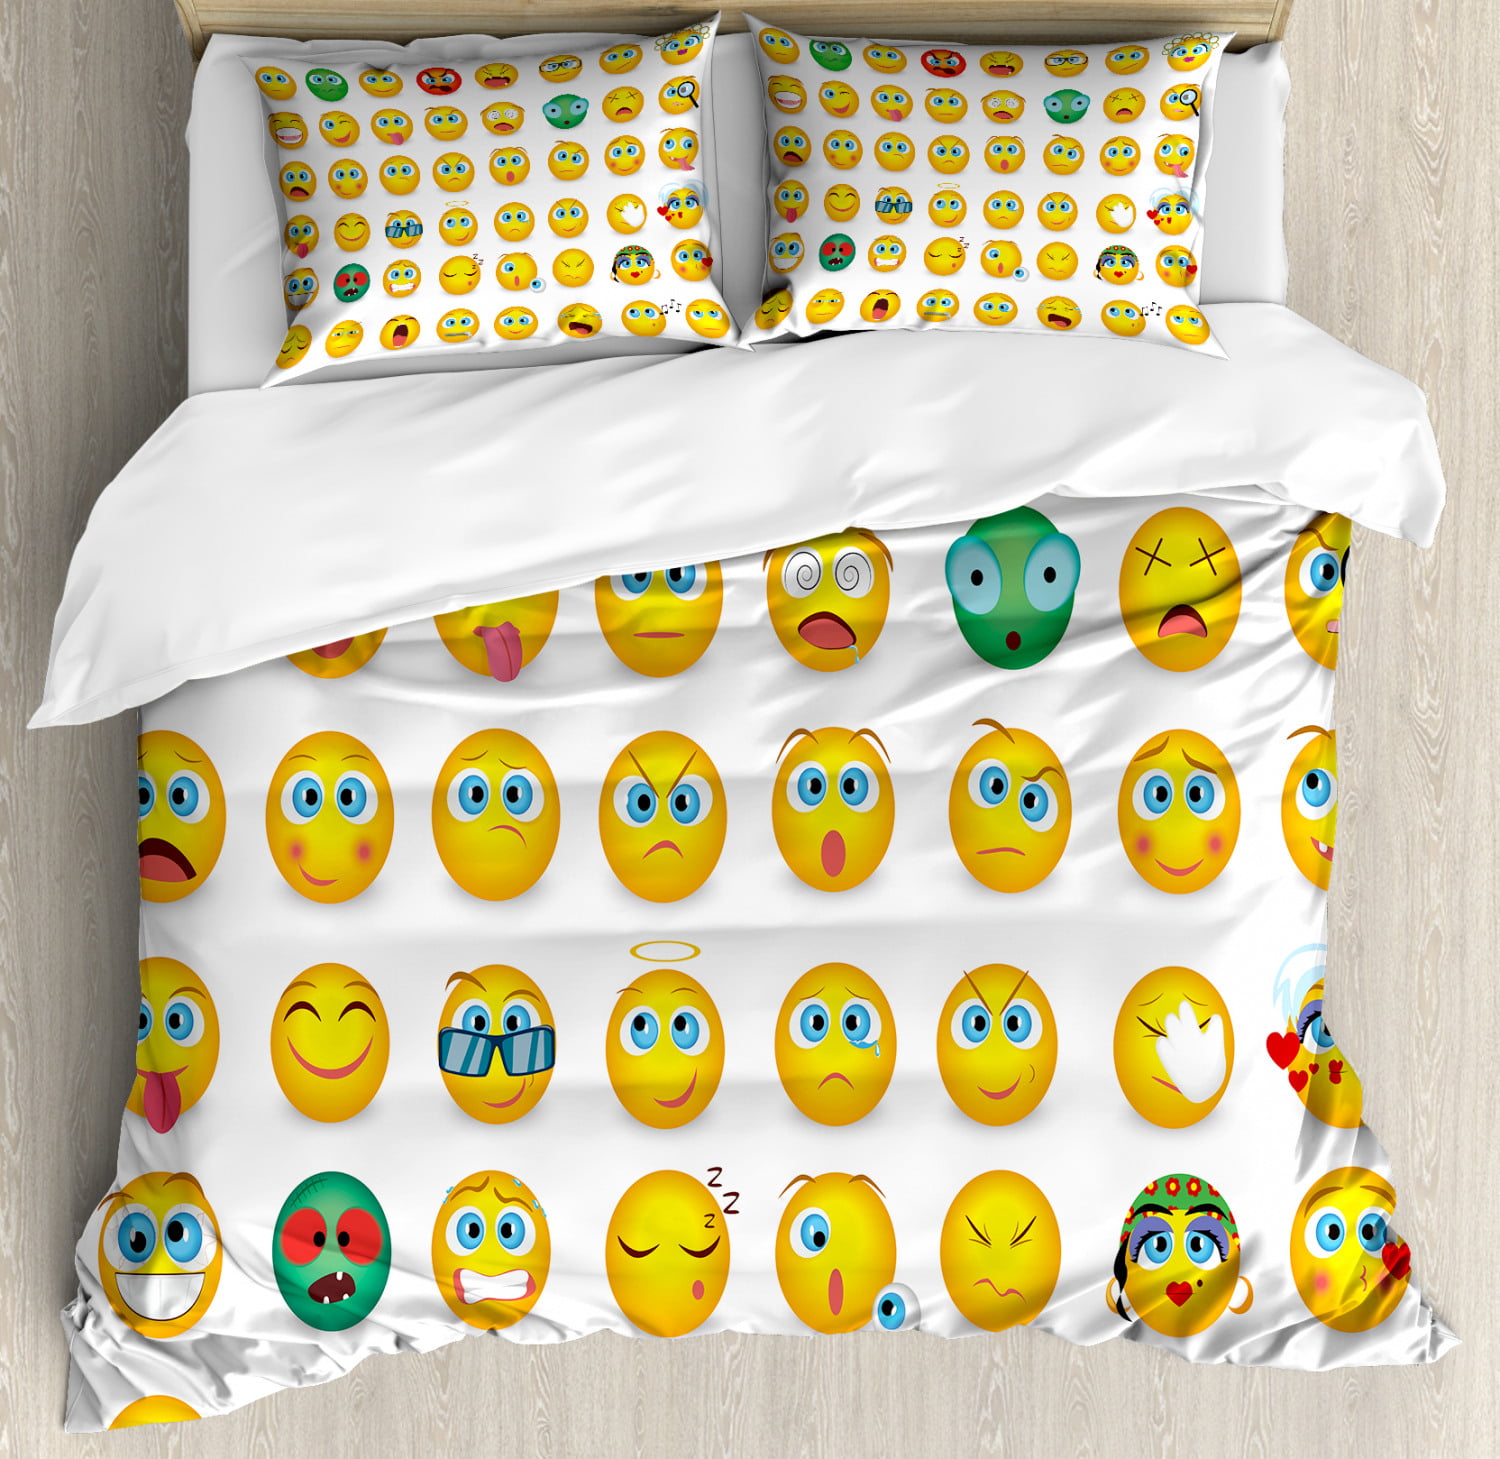 Emoji Icon Bag Bedding Set Colorful Bed Cover Sheet Queen Size Kids Teen Bedroom 